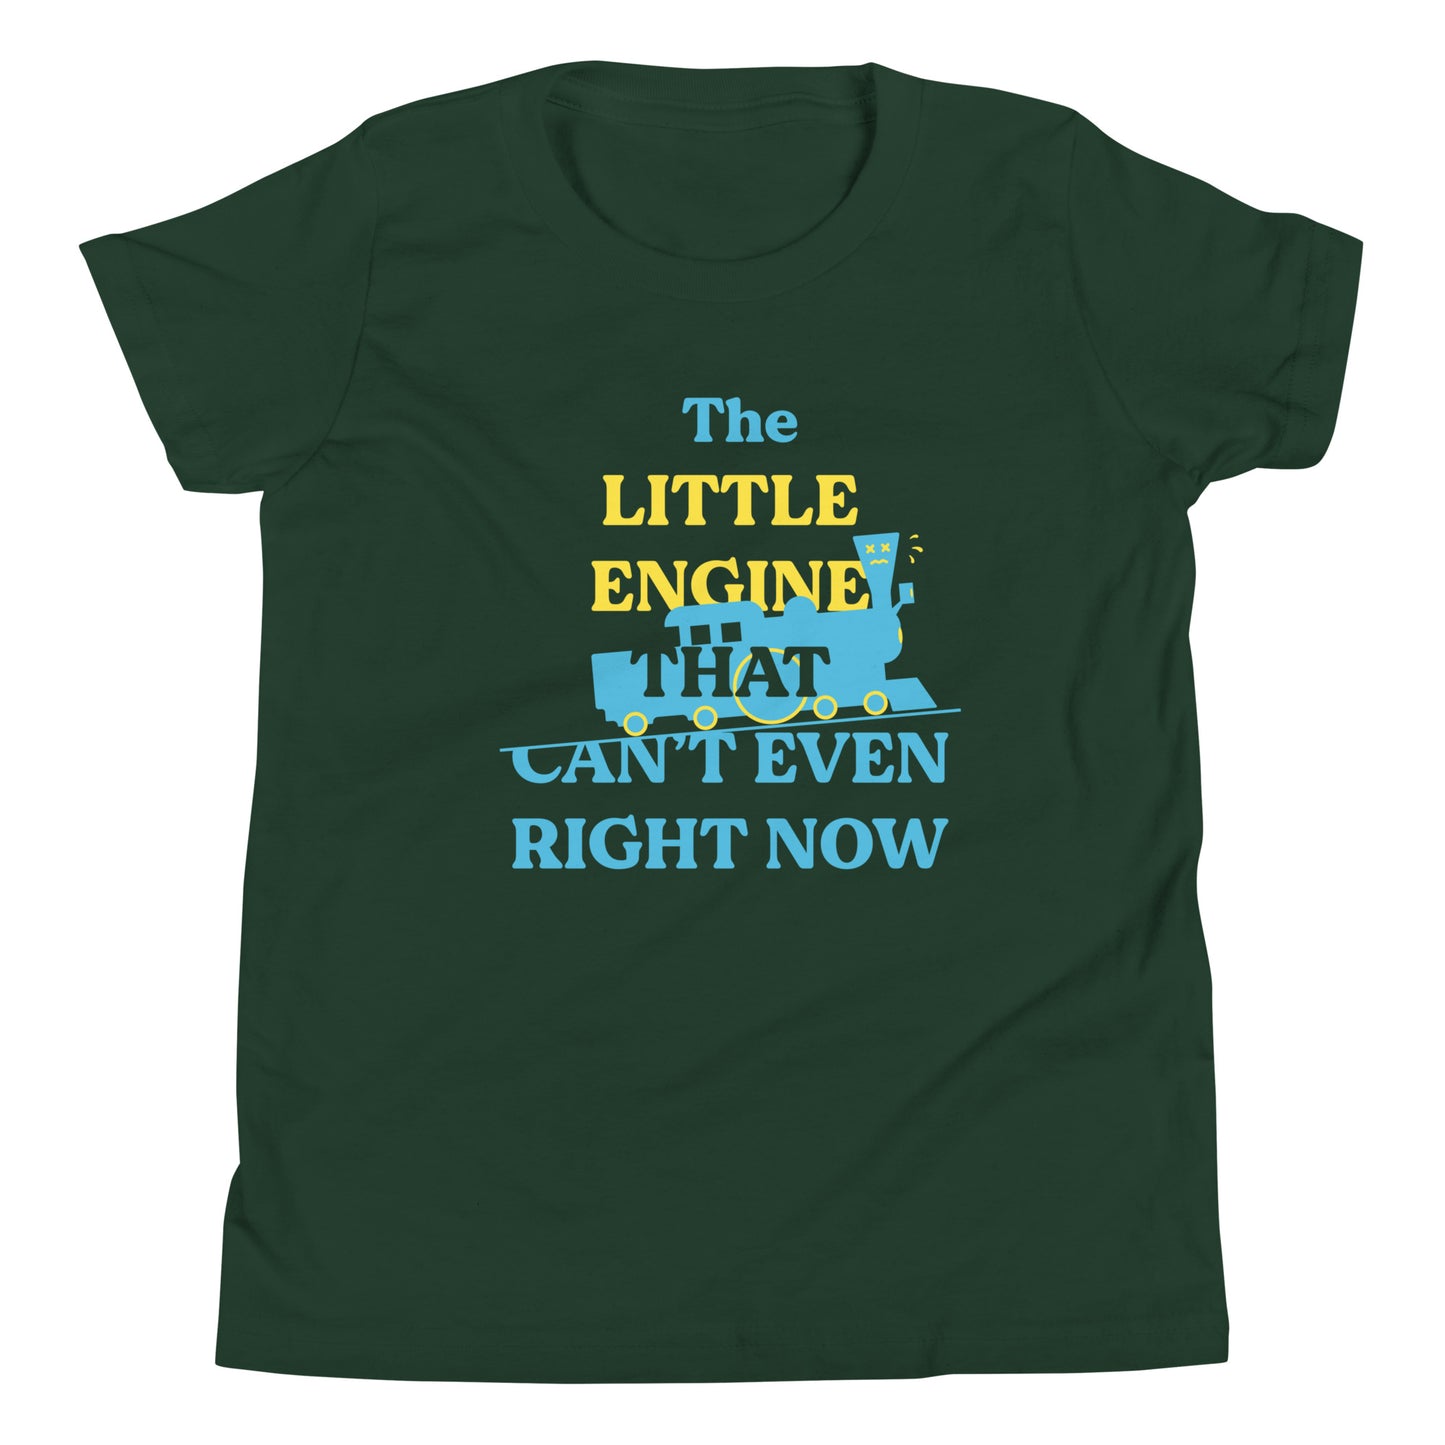 The Little Engine That Can't Even Right Now Kid's Youth Tee